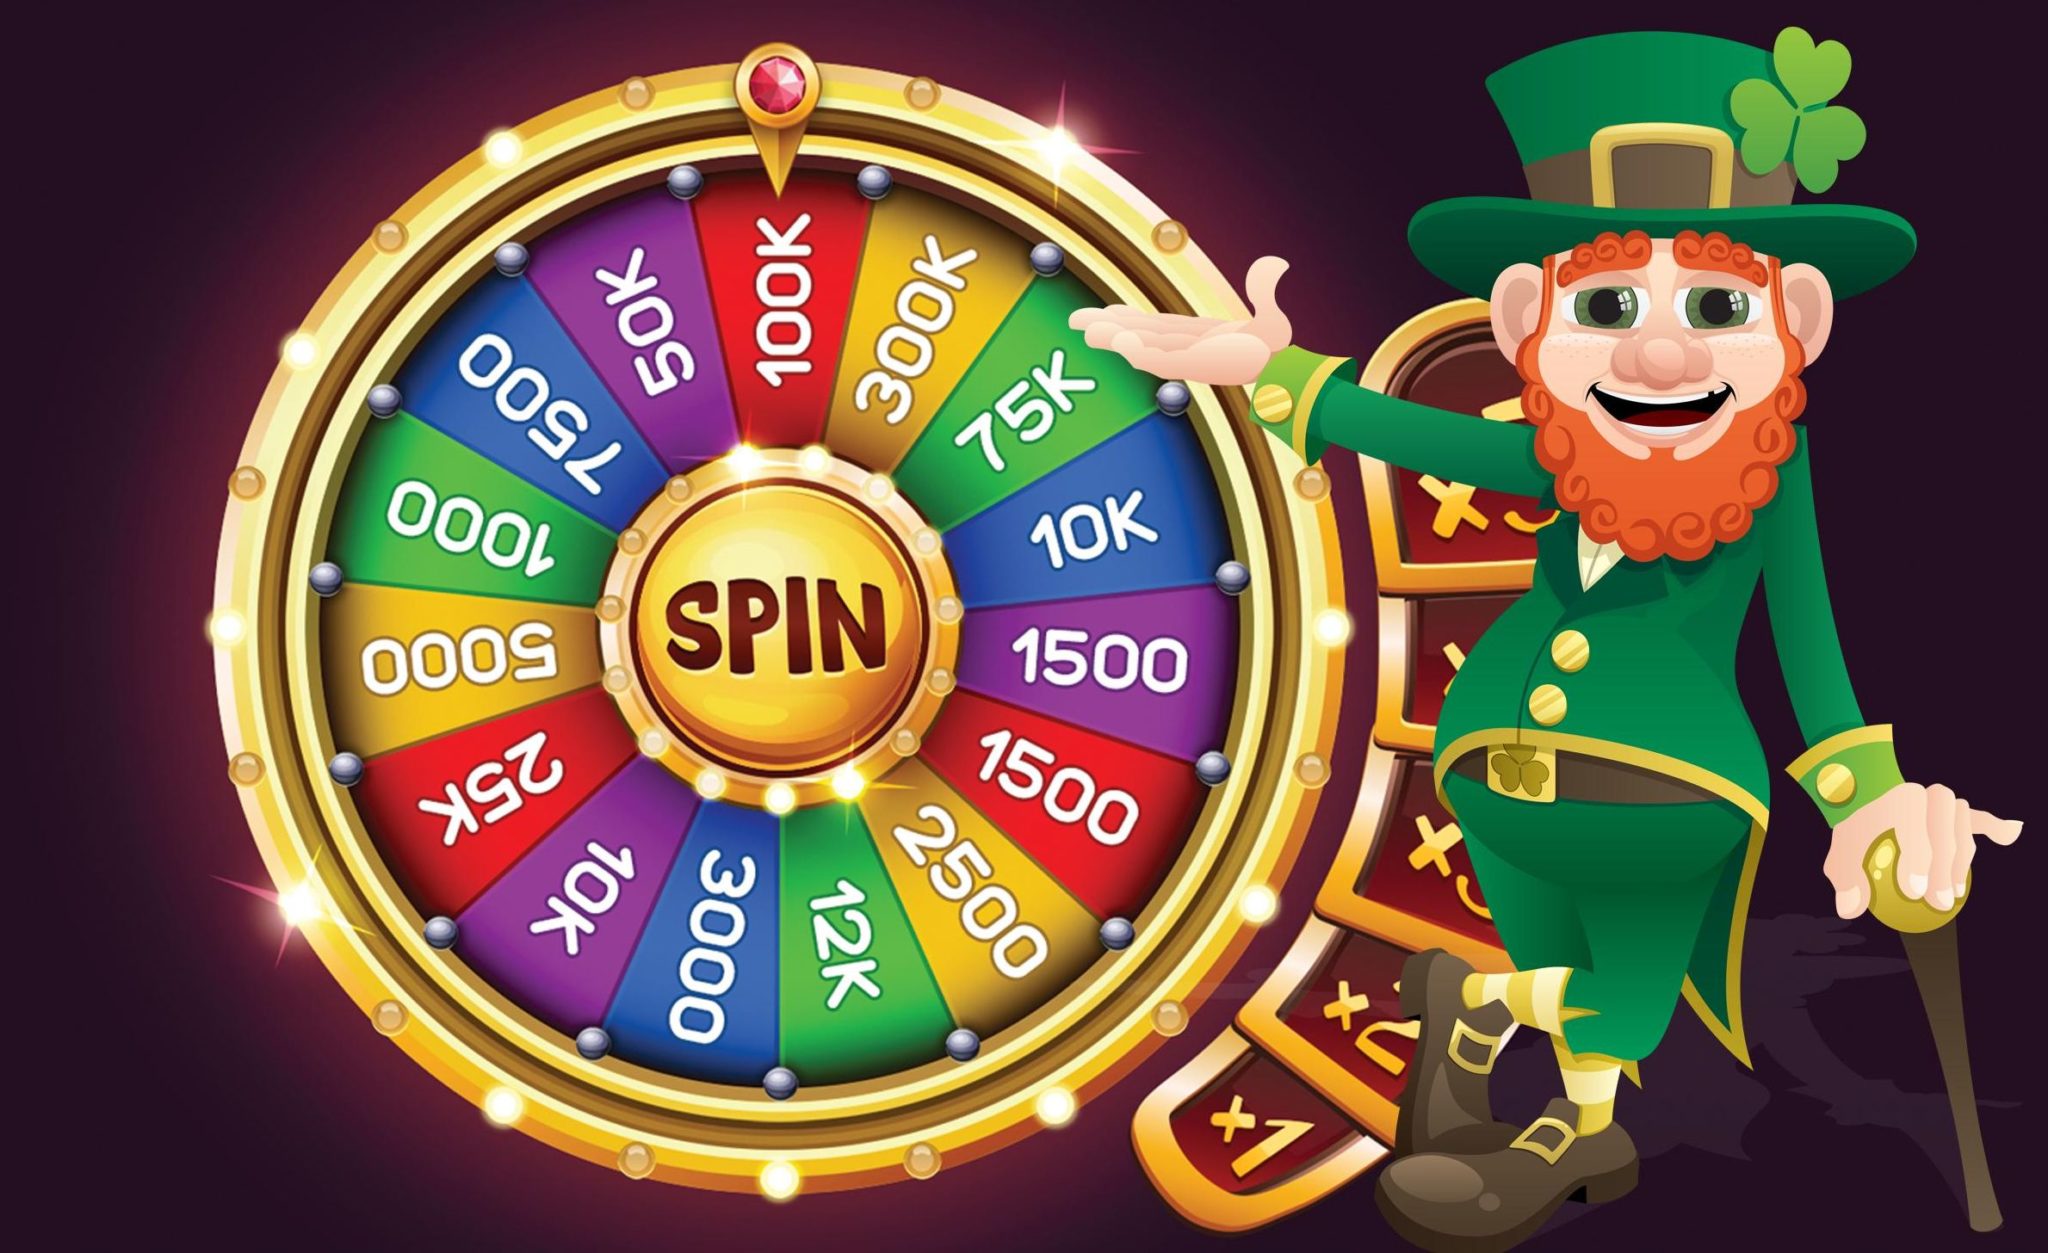 Spin Casino Canada Review - Spin Palace Online Slot Games